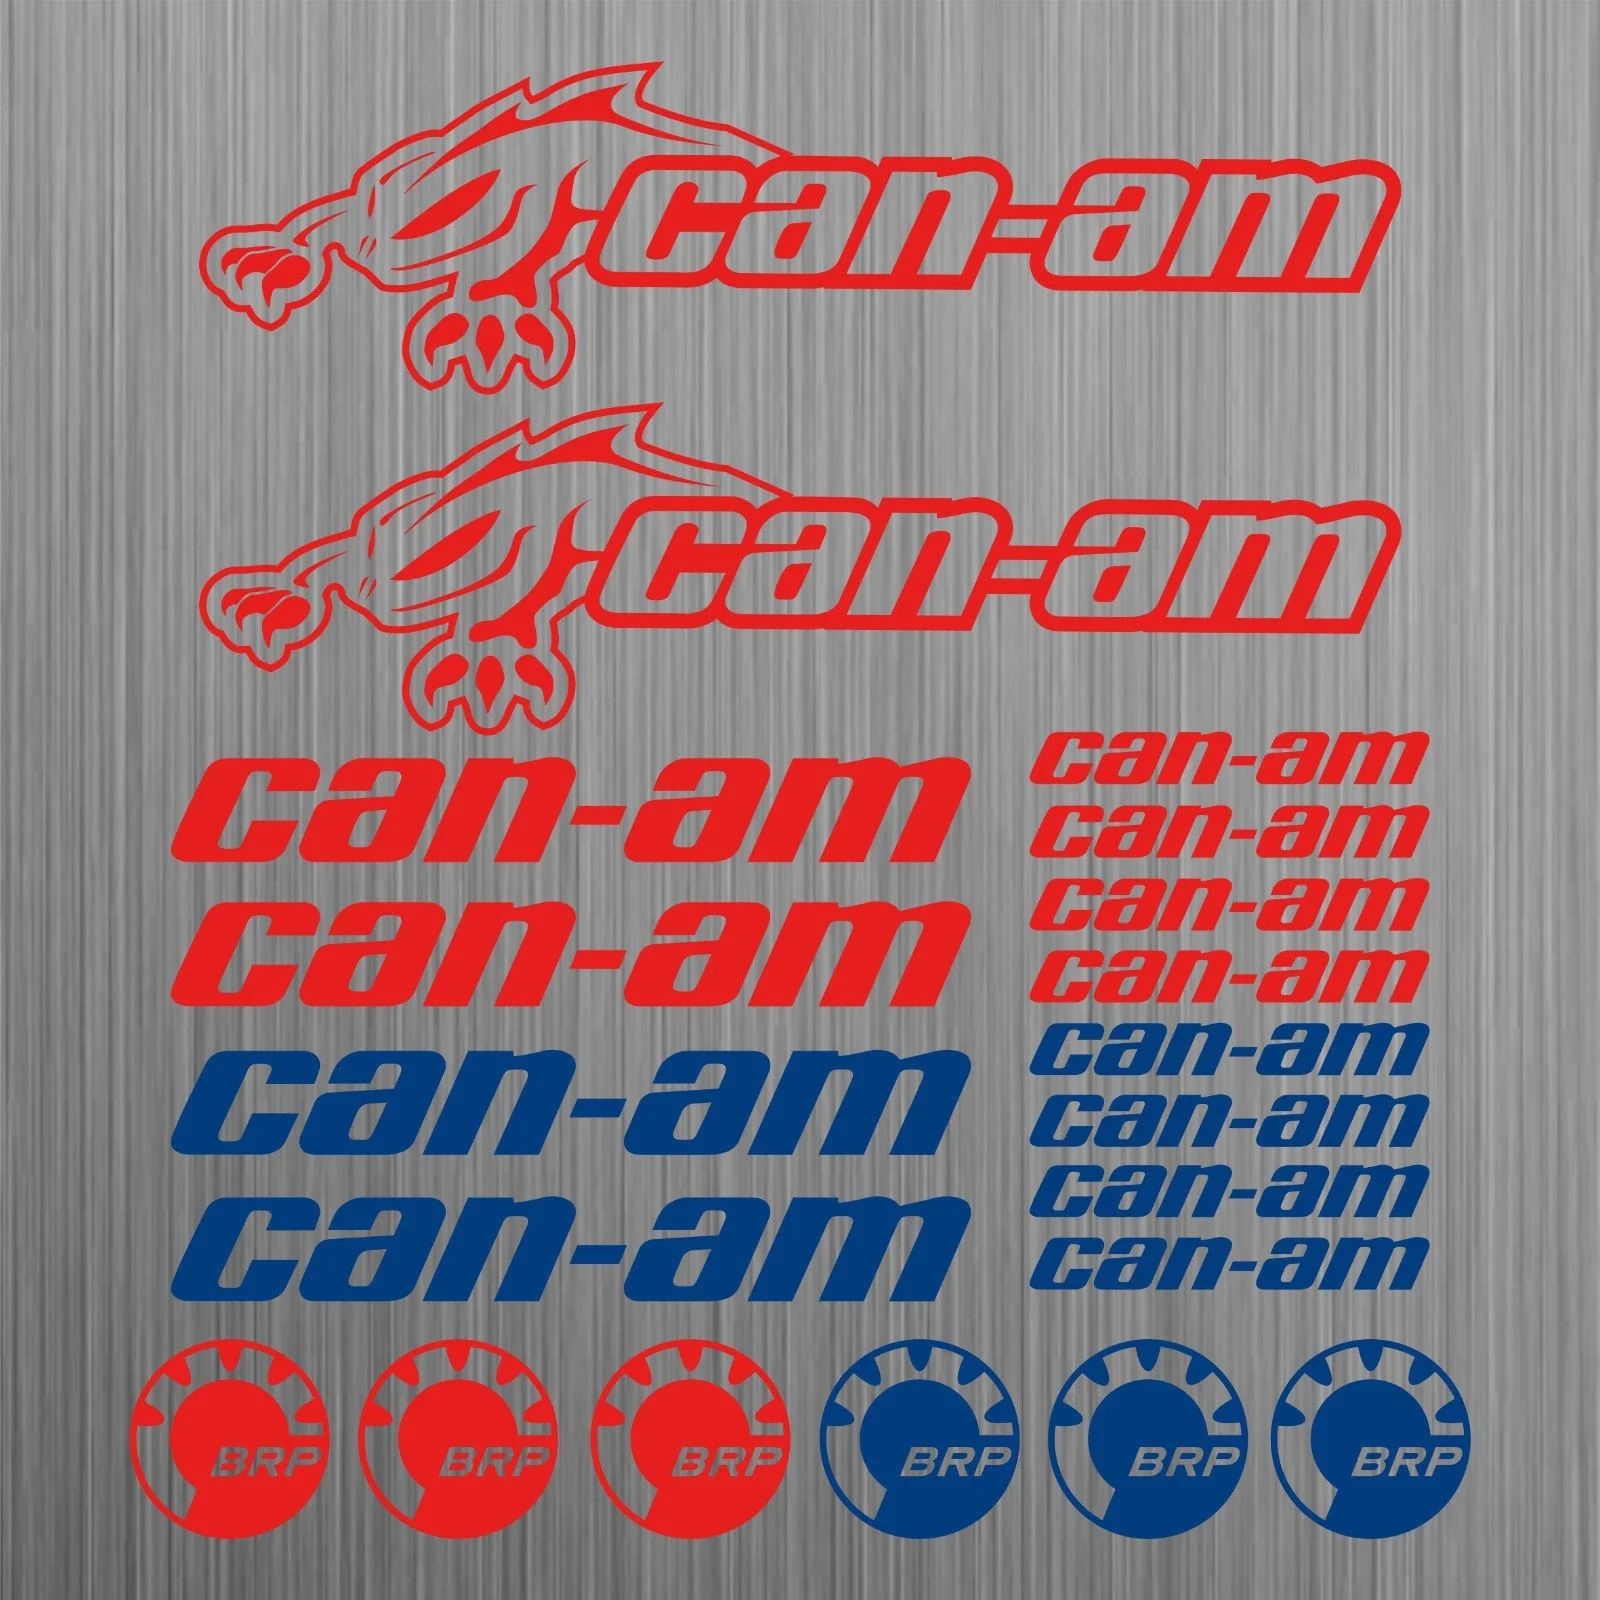 YELLOW For can-am canam BRP sticker quad ATV decal 20 Pieces Car Styling